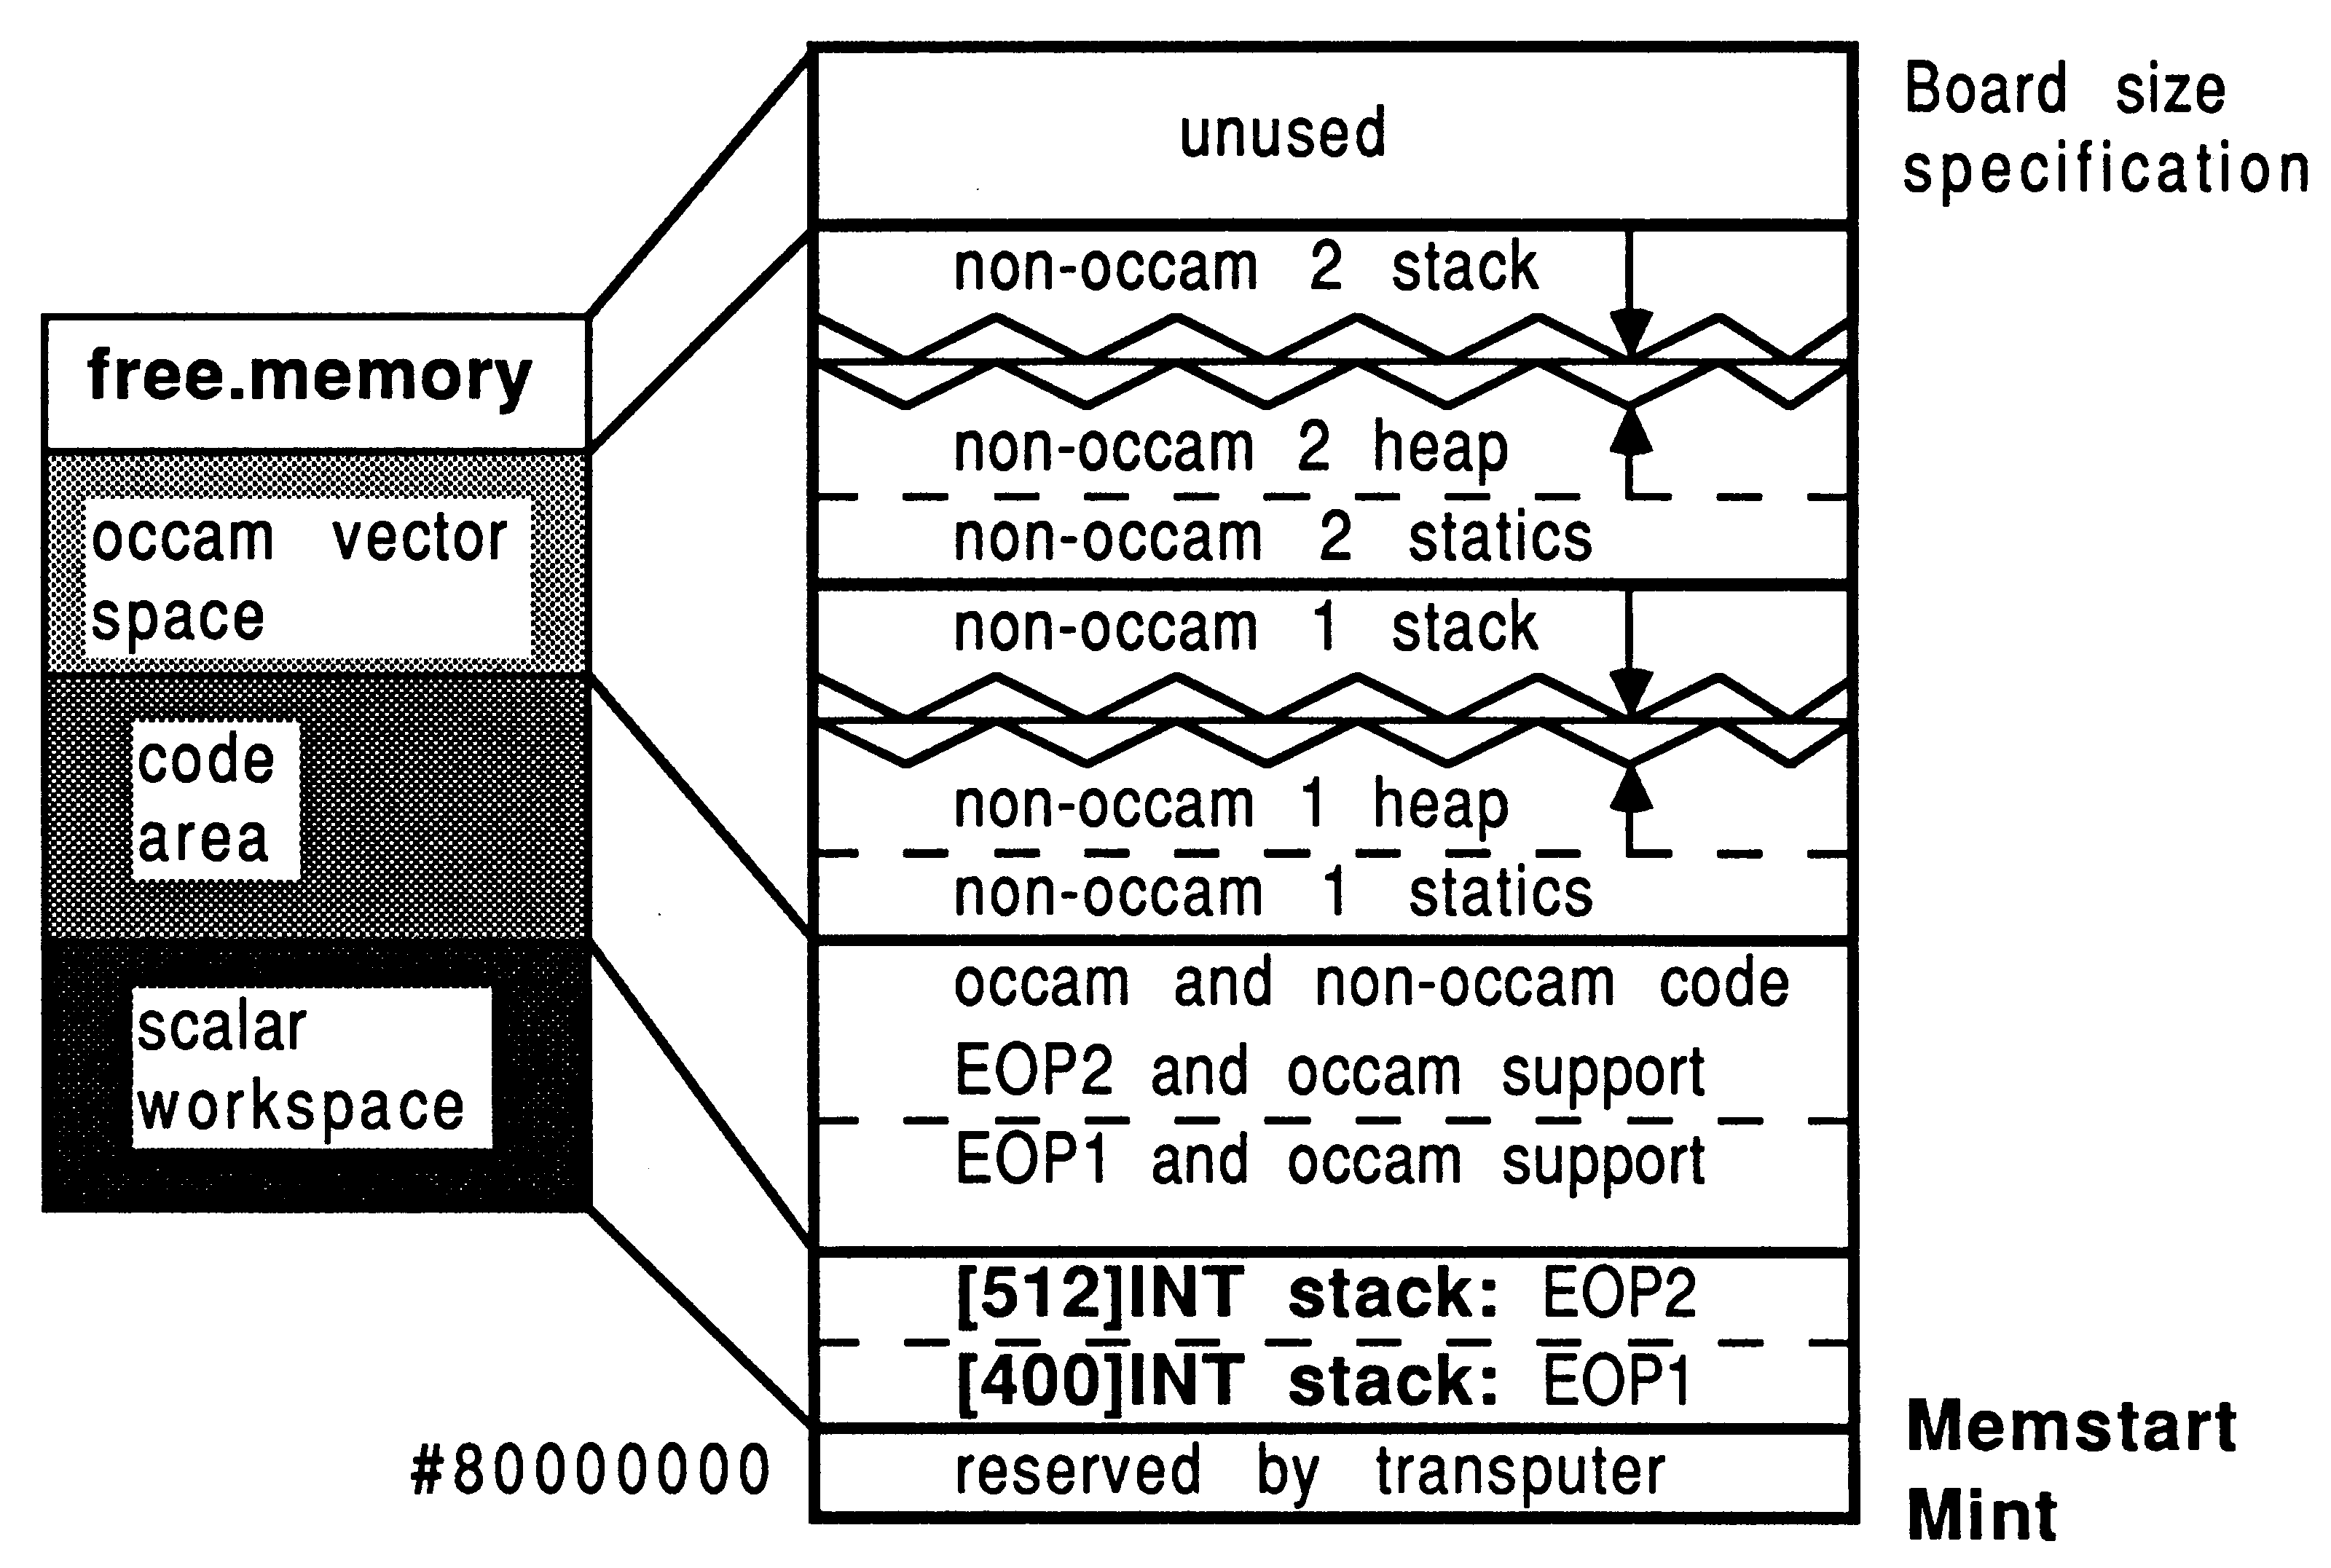 Allocating
memory for two EOPs from occam vector space